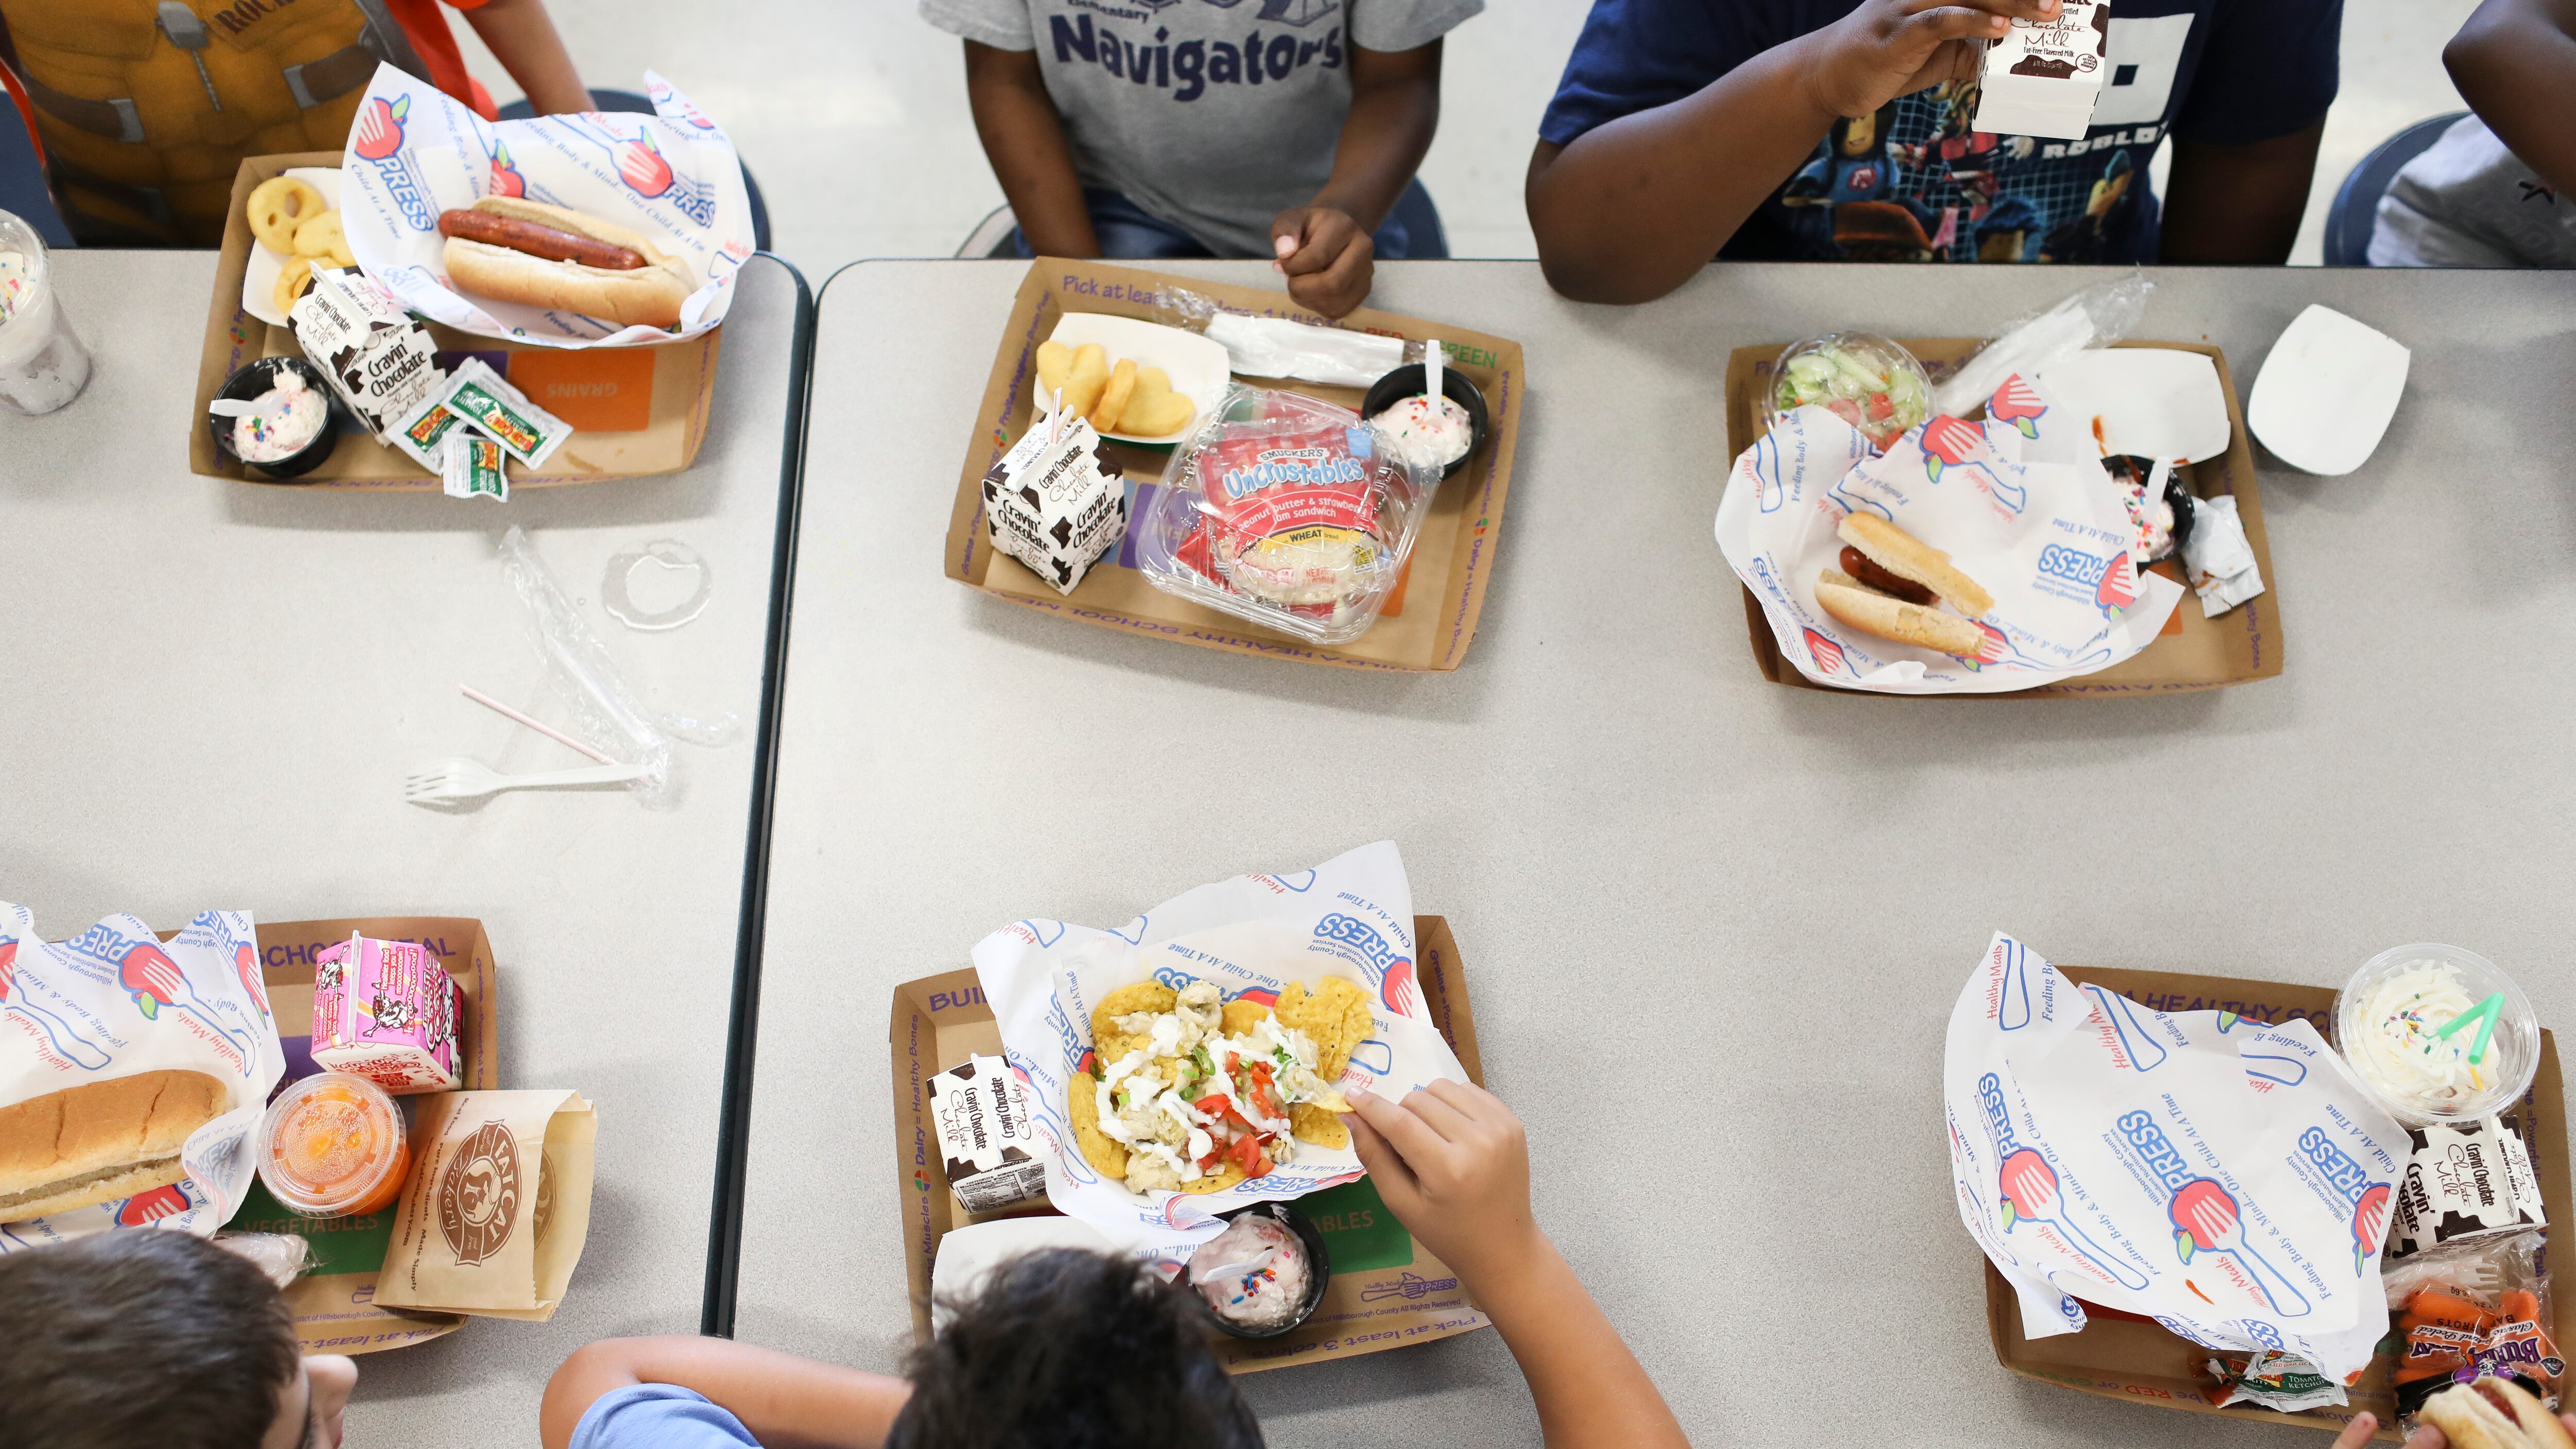 A group of children eat their school lunches at a table in the cafeteria.